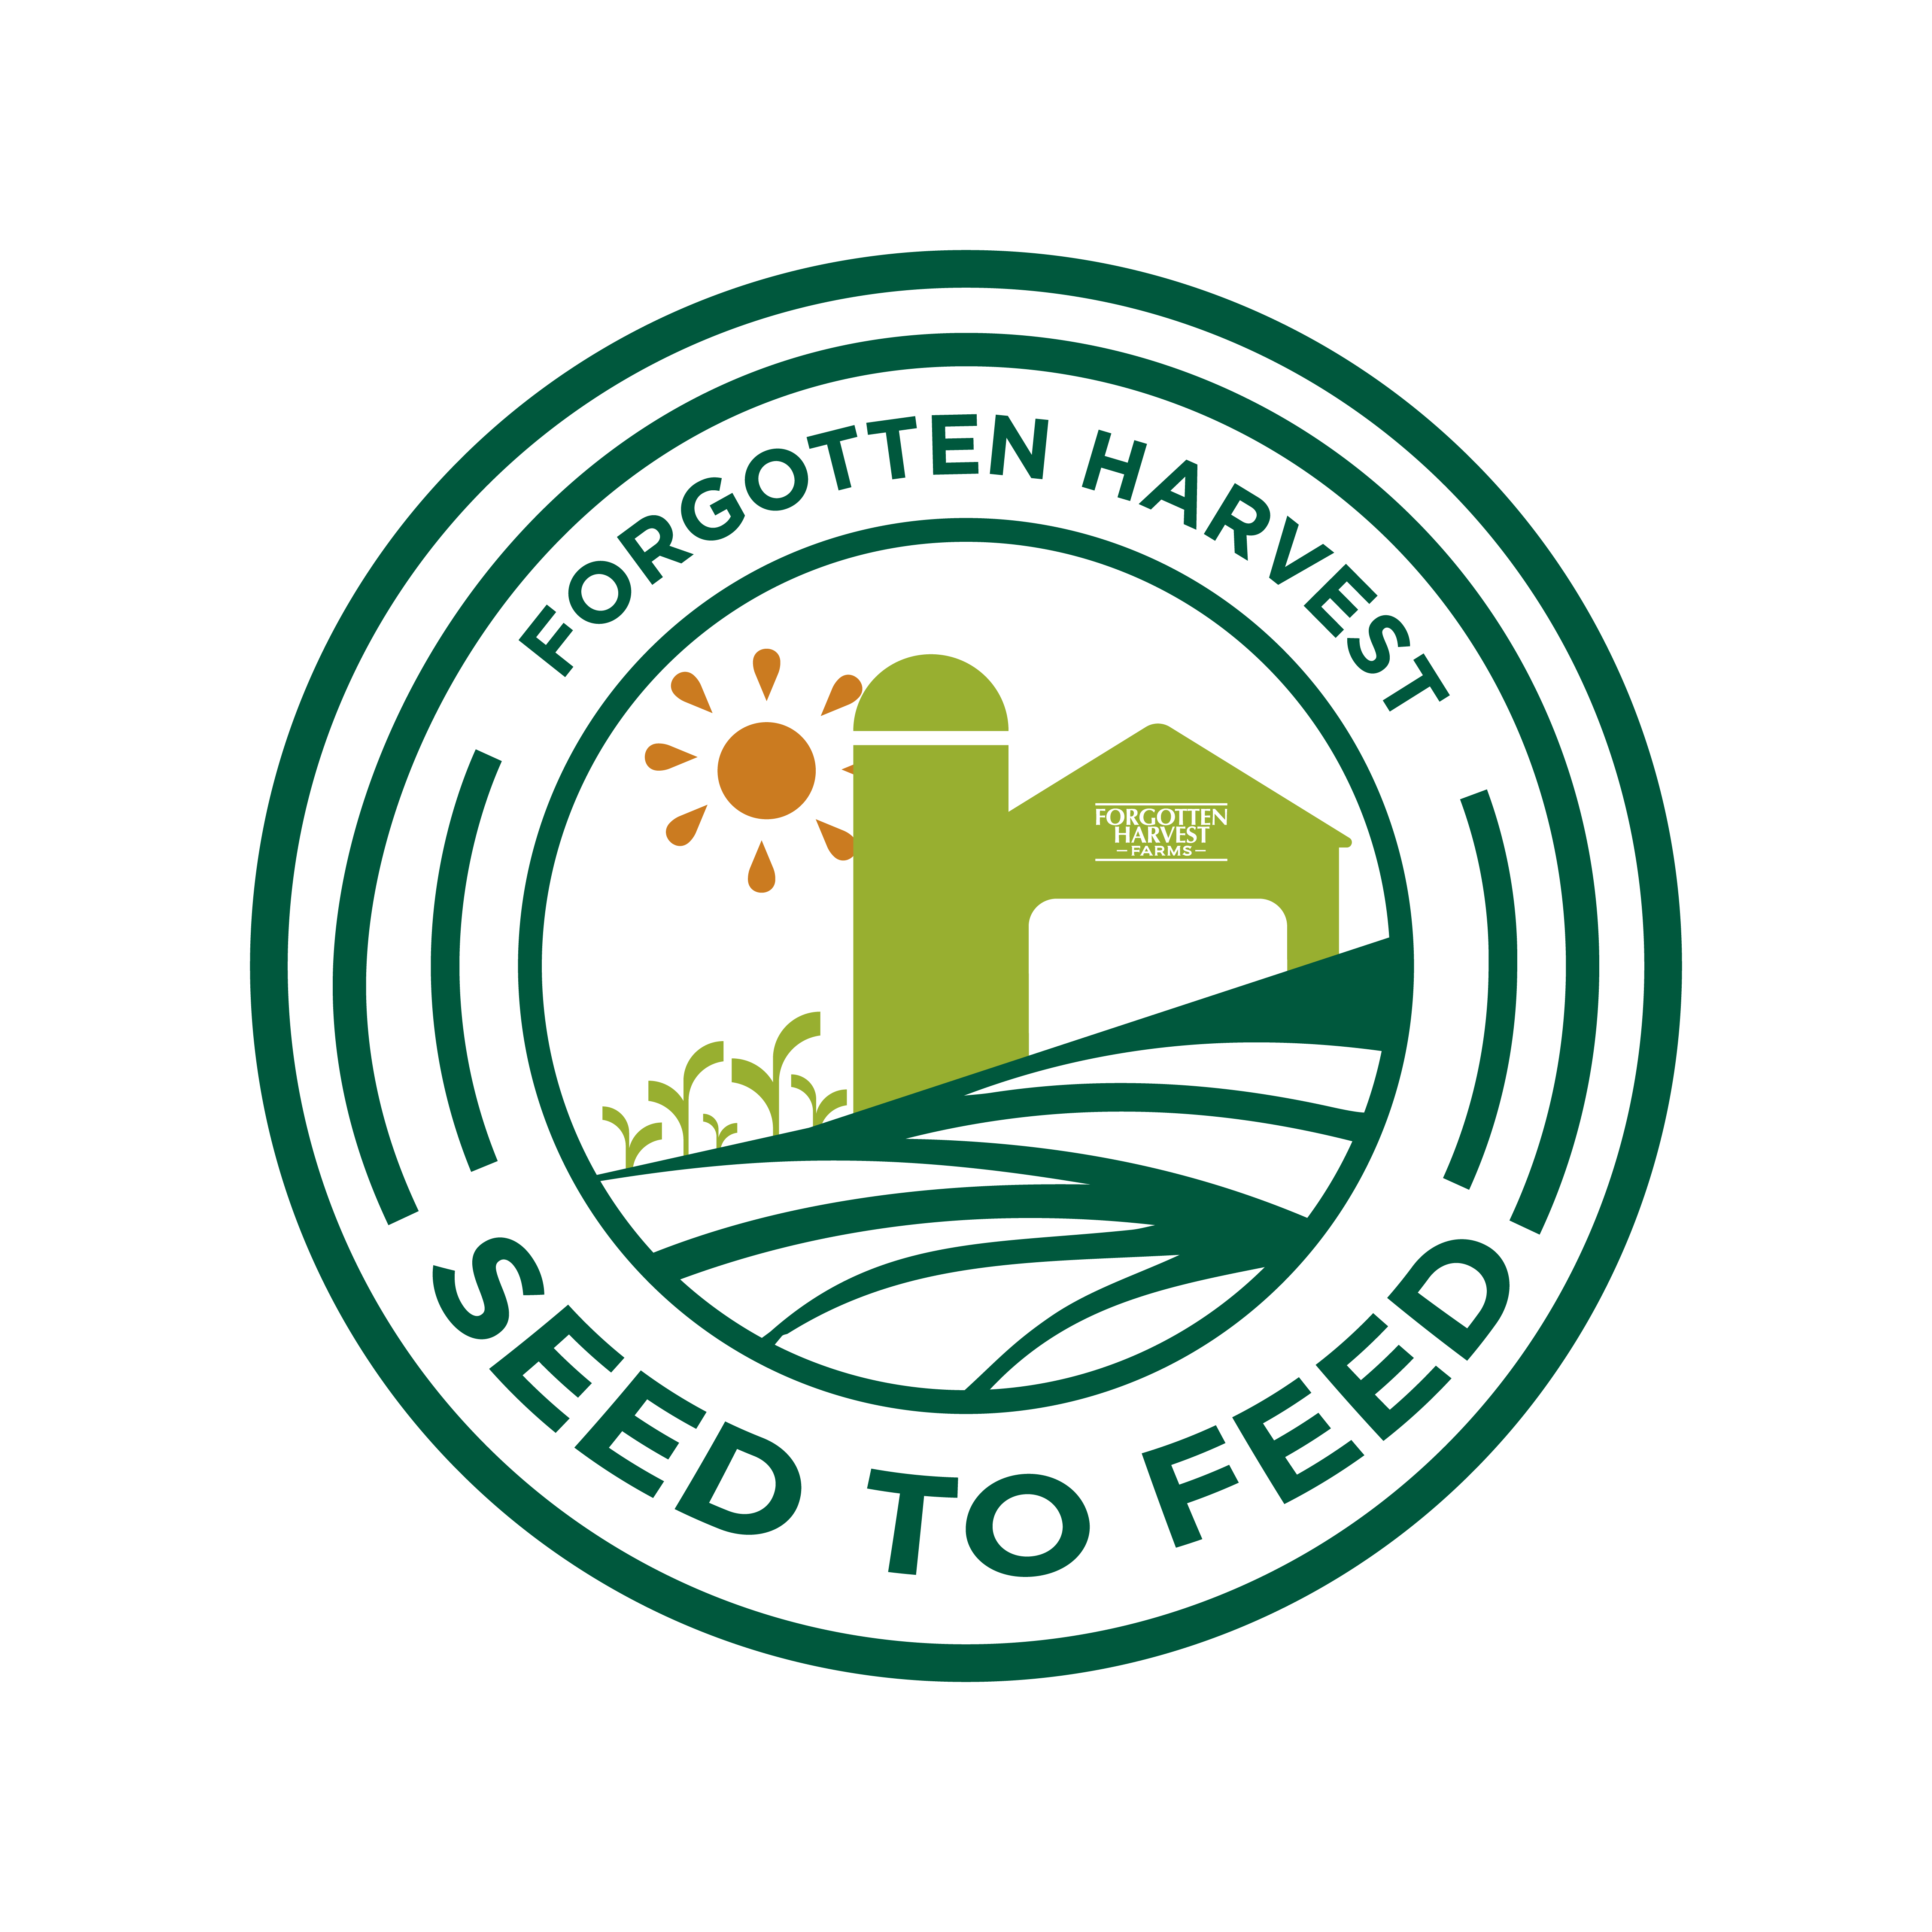 Seed to Feed: Forgotten Harvest’s Newest Way to Give